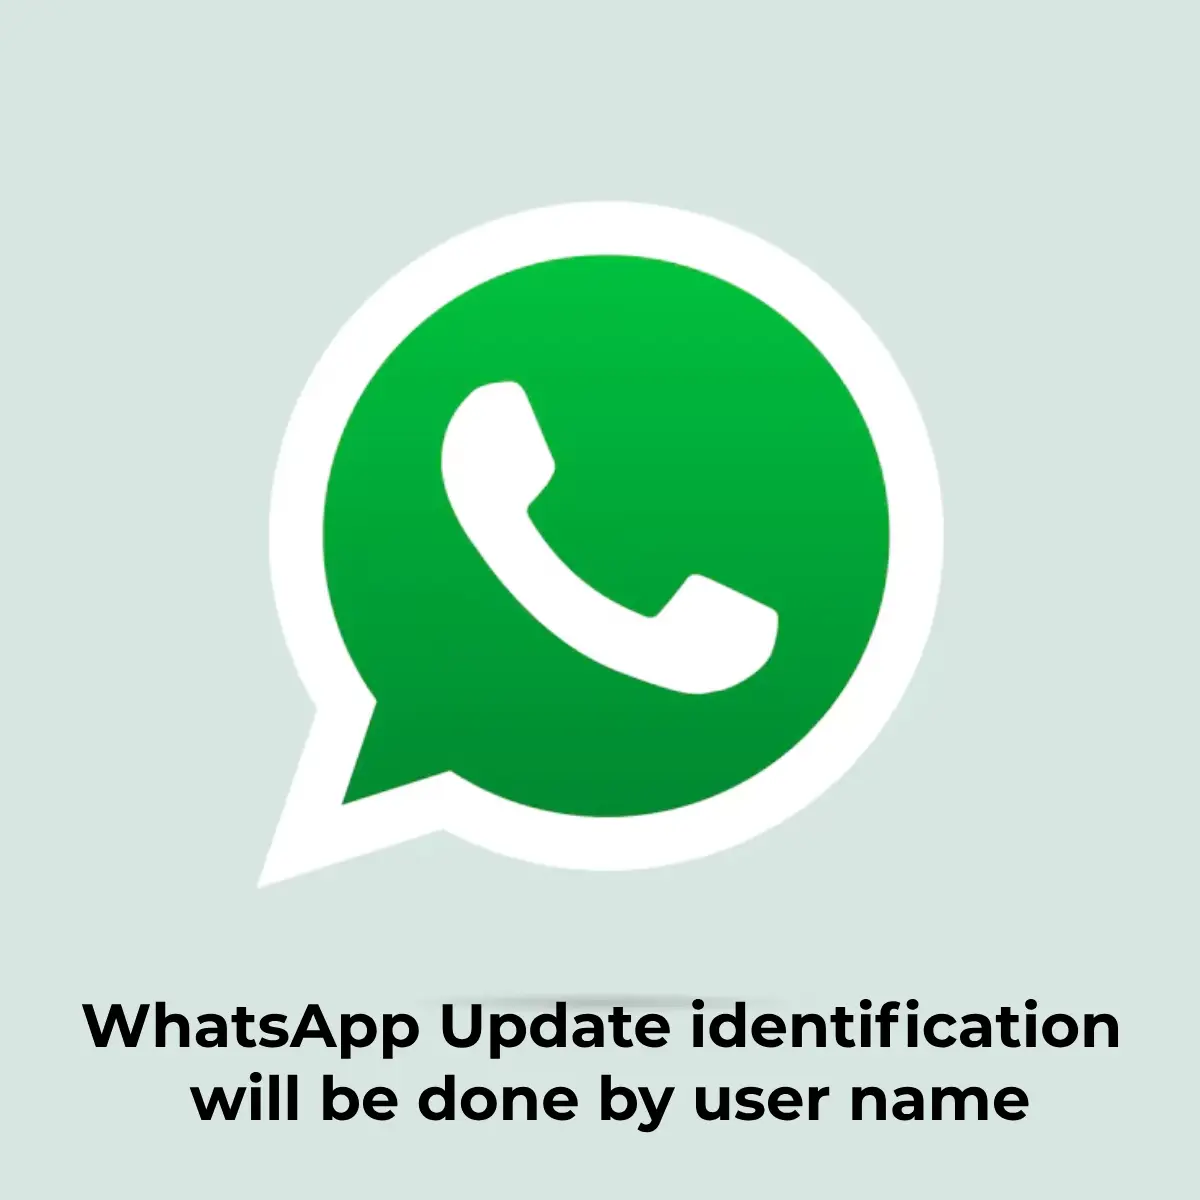 WhatsApp Update Now, a mobile number will not be required, identification will be done by user name